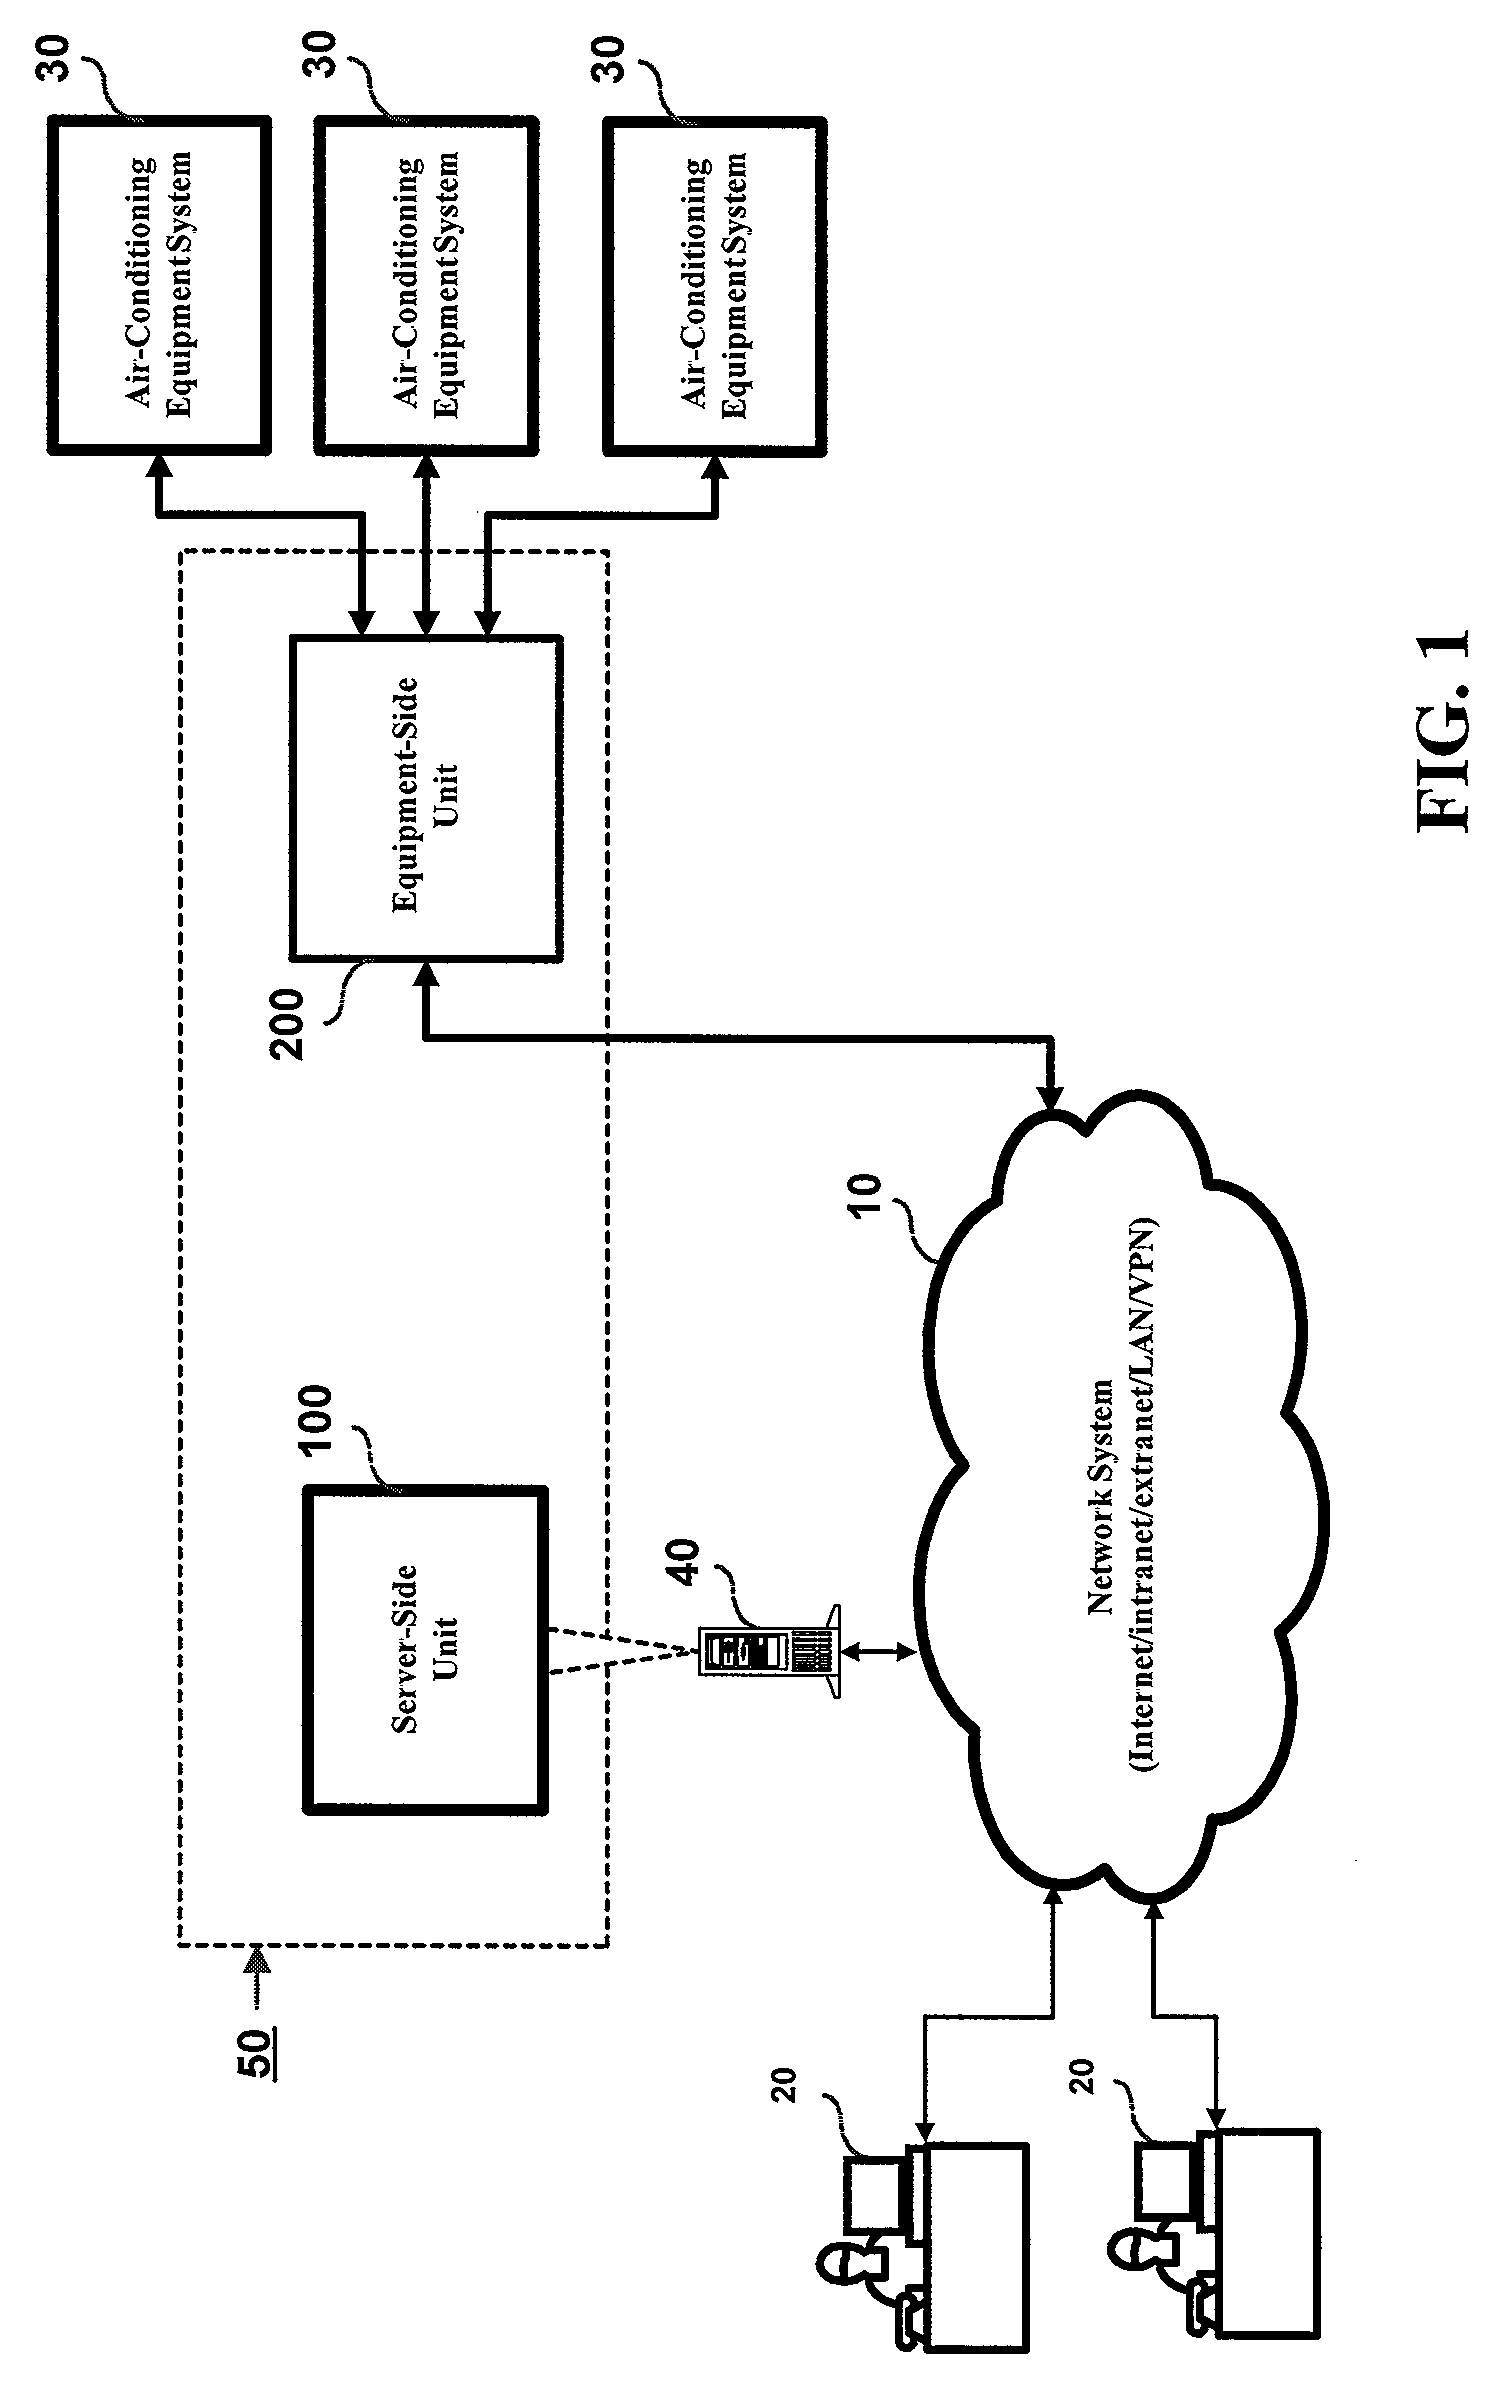 Network-based air-conditioning equipment remote monitoring and management system